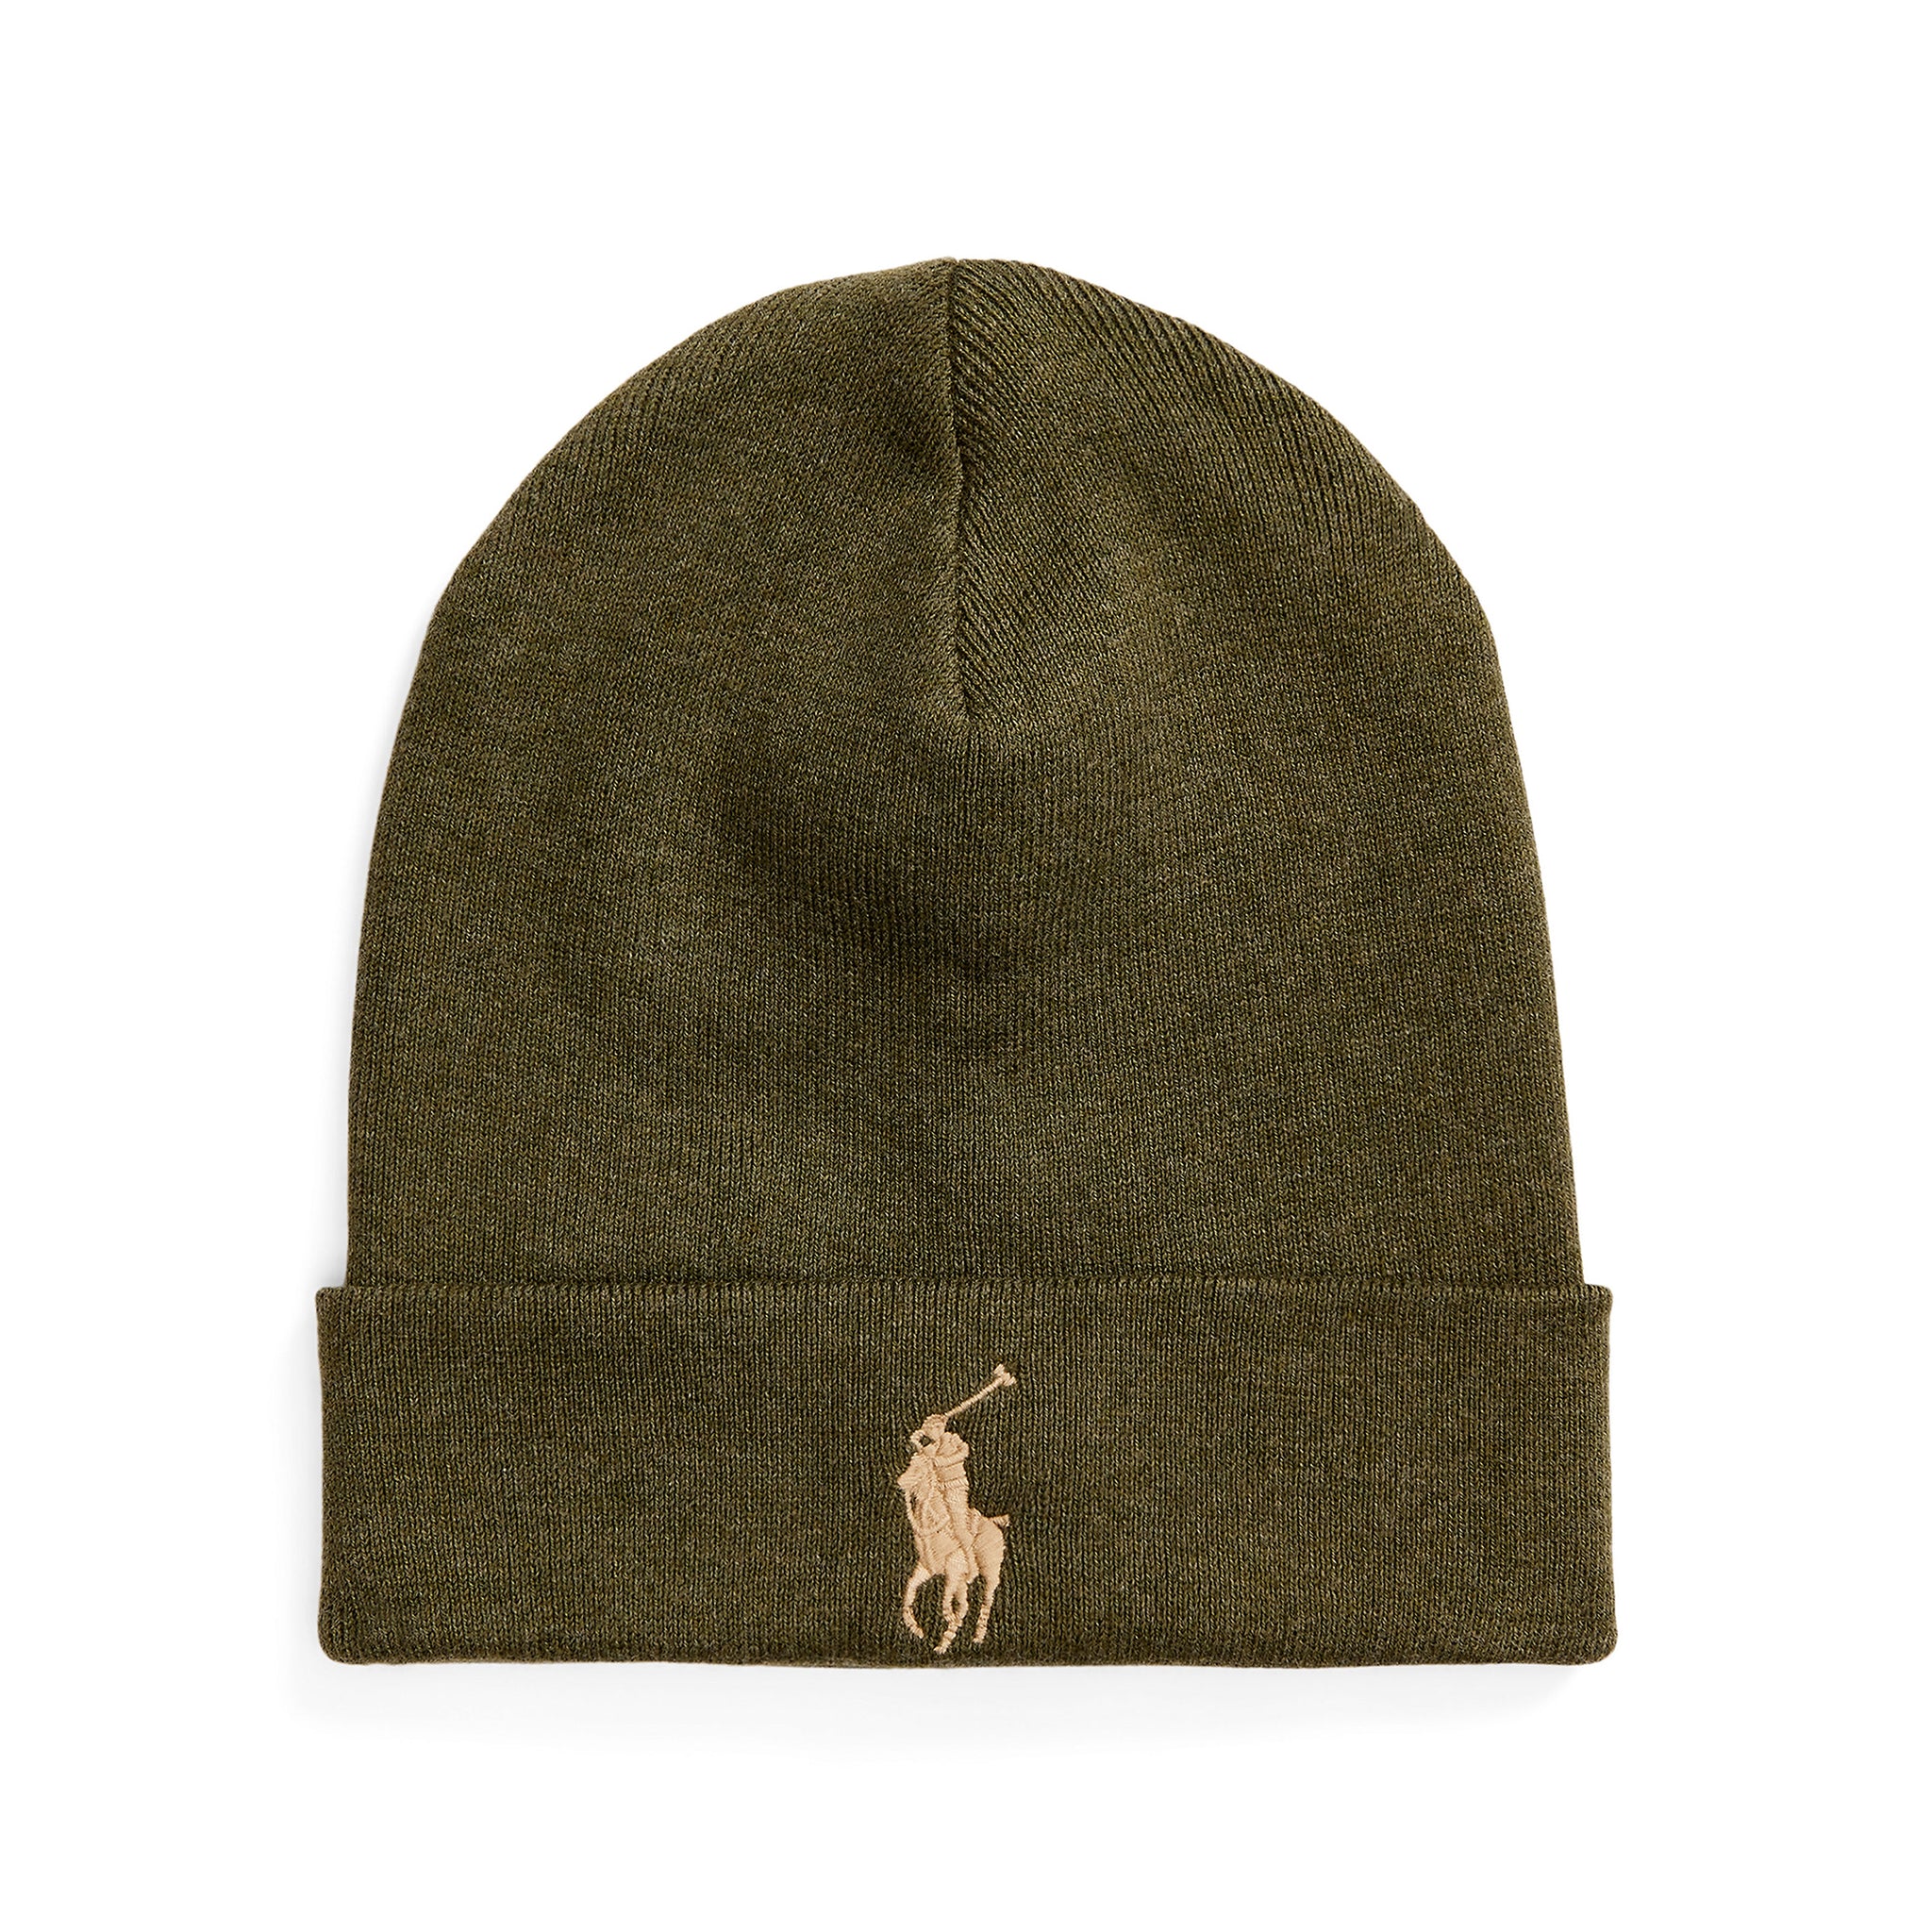 polo-ralph-lauren-ribbed-cotton-hat-710886138-drab-olive-heather-004